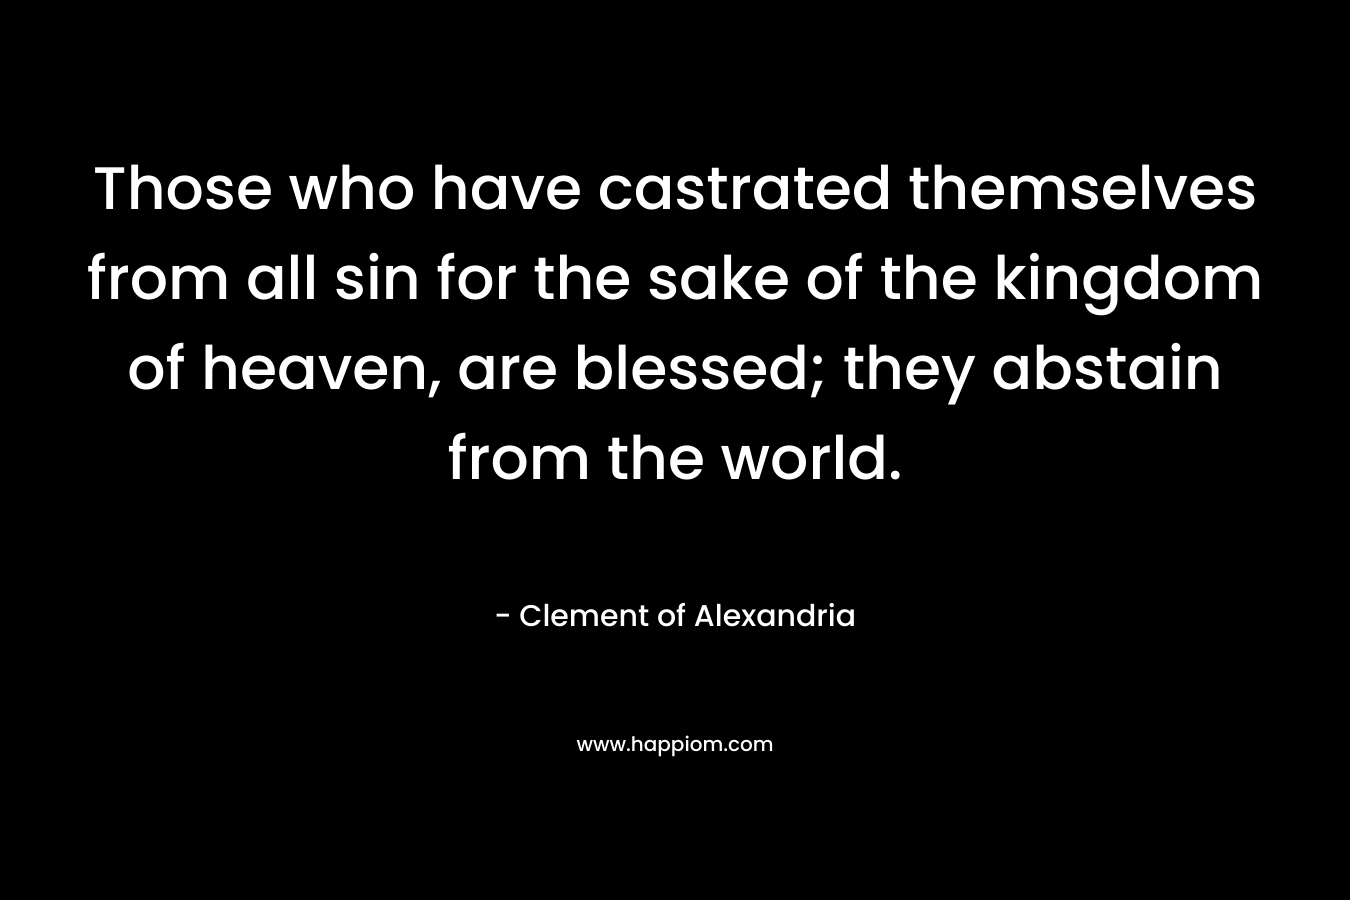 Those who have castrated themselves from all sin for the sake of the kingdom of heaven, are blessed; they abstain from the world. – Clement of Alexandria